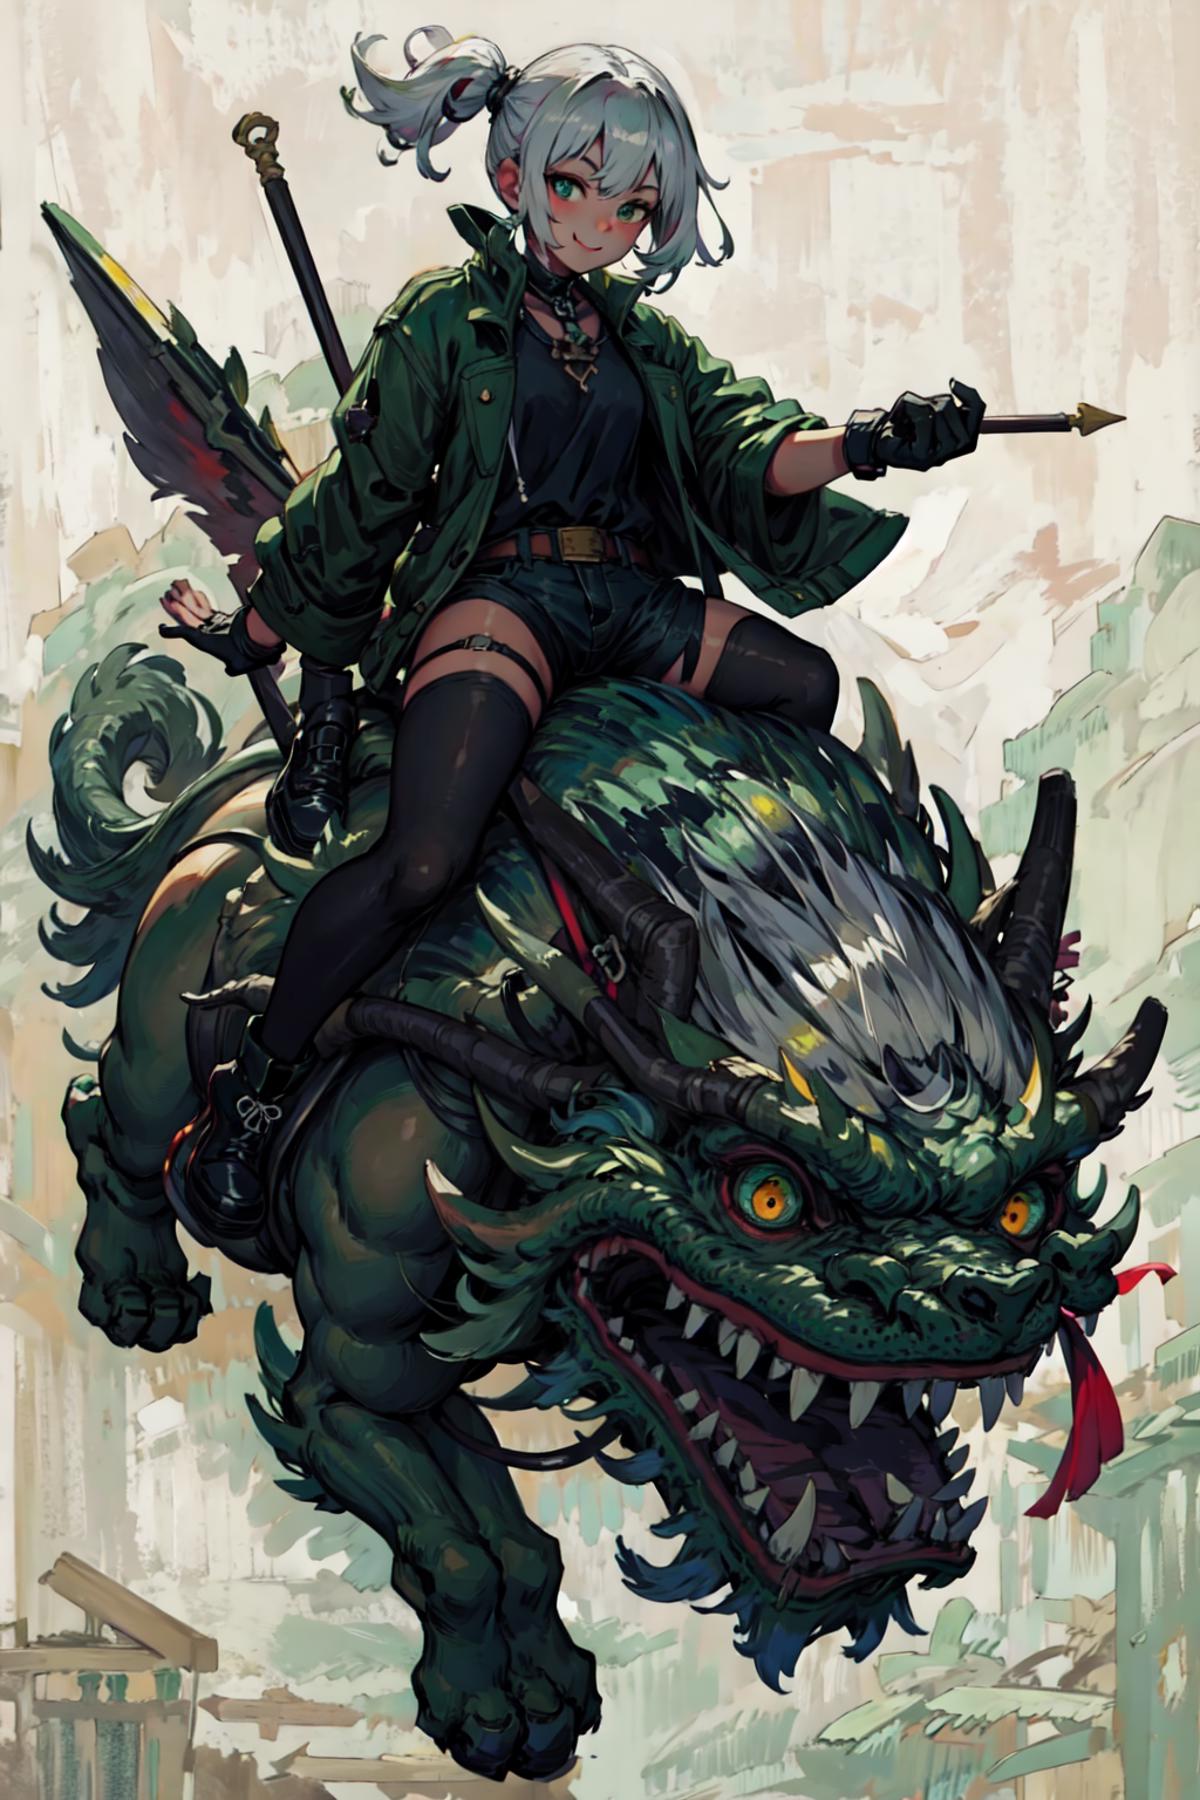 [LoRa] Riding Monster/怪獣騎士 Concept image by Jemnite